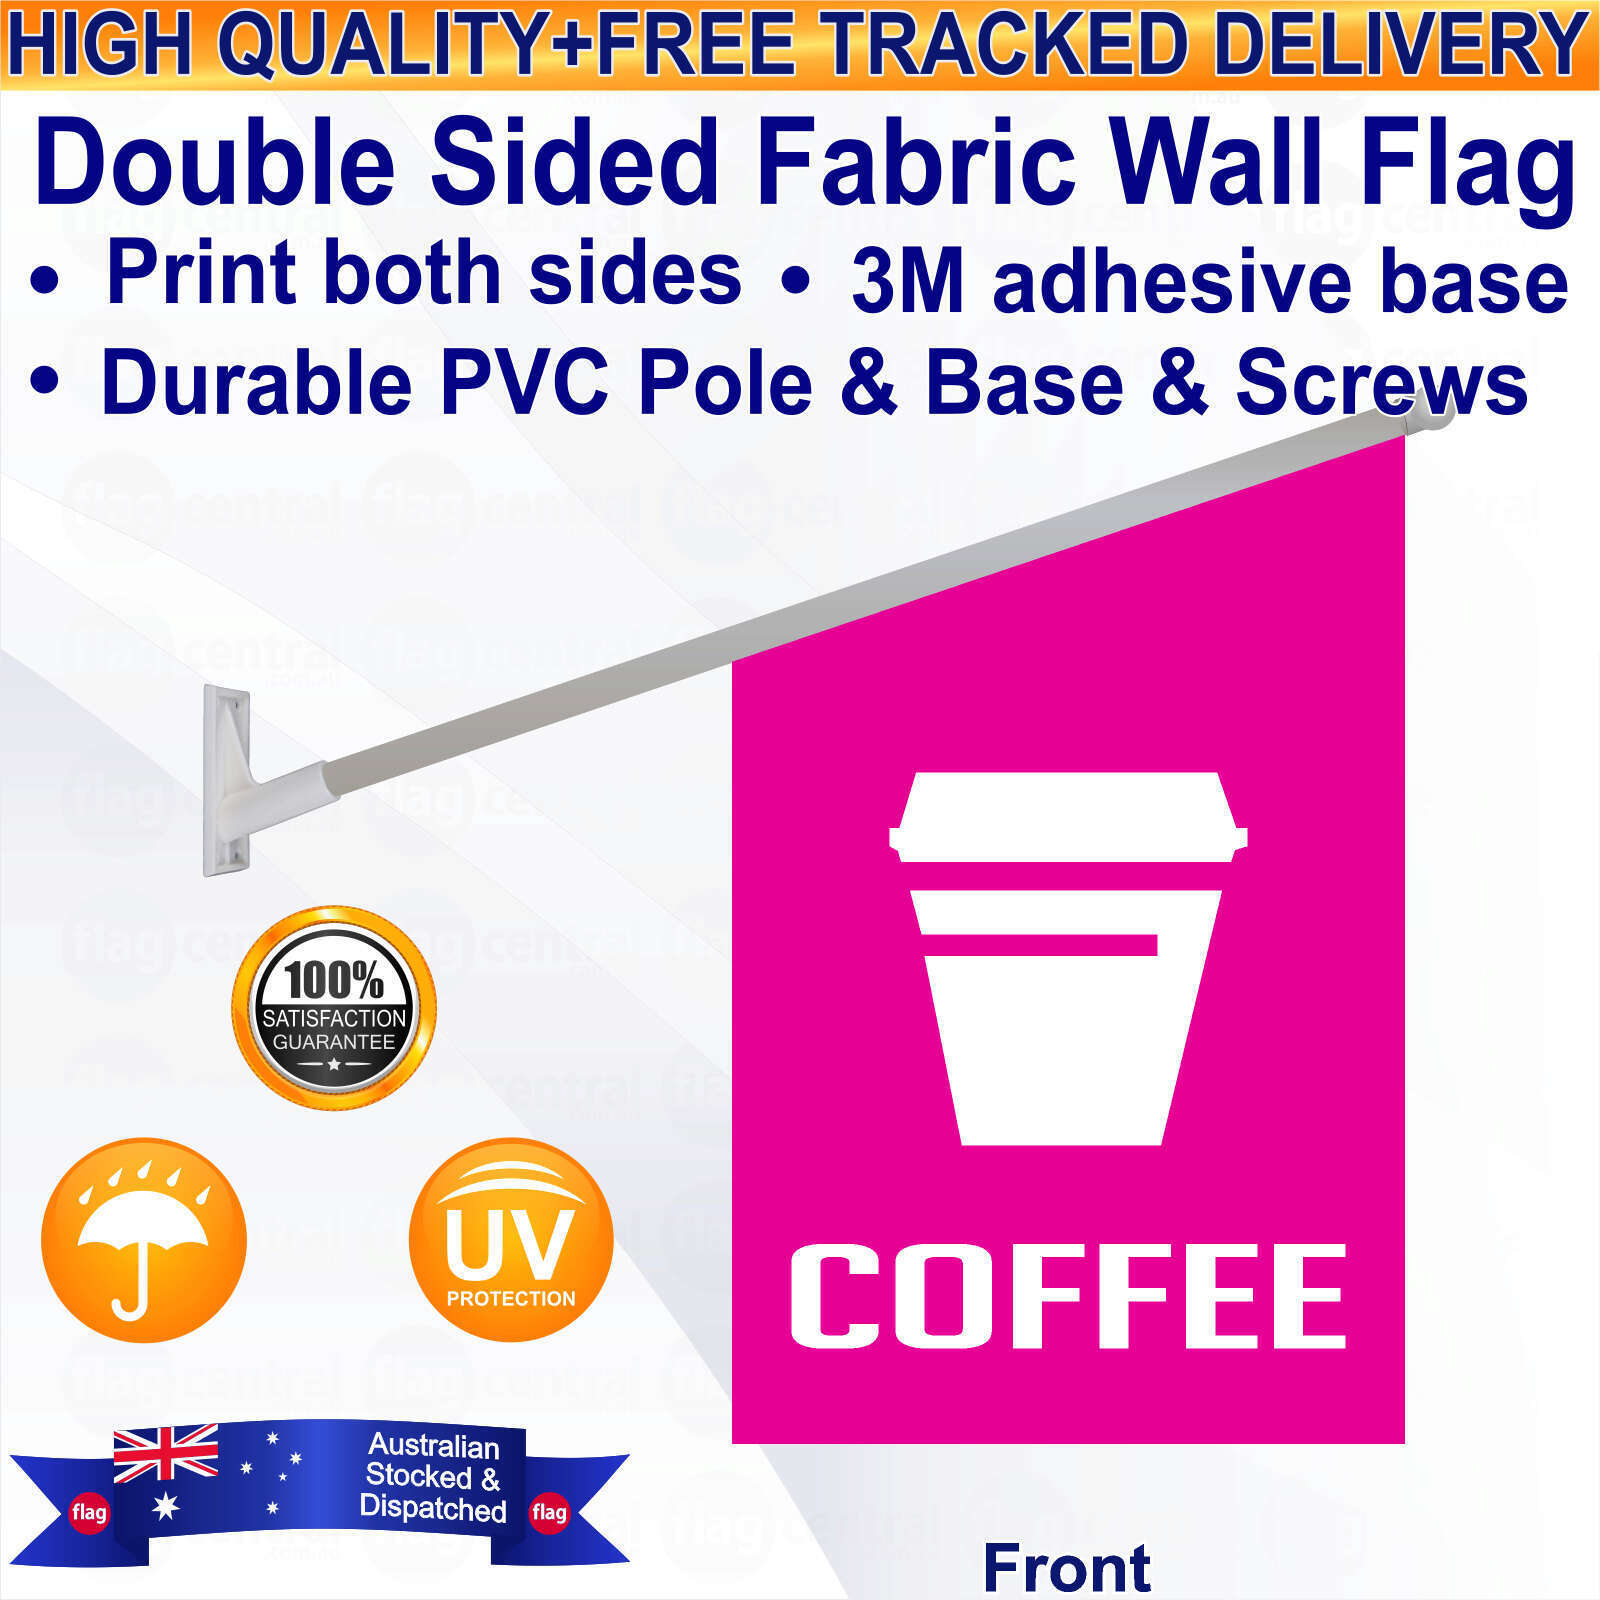 COFFEE with a TAKEAWAY CUP Pink Deluxe Shiny Double-Sided Fabric Wall Flag Kit